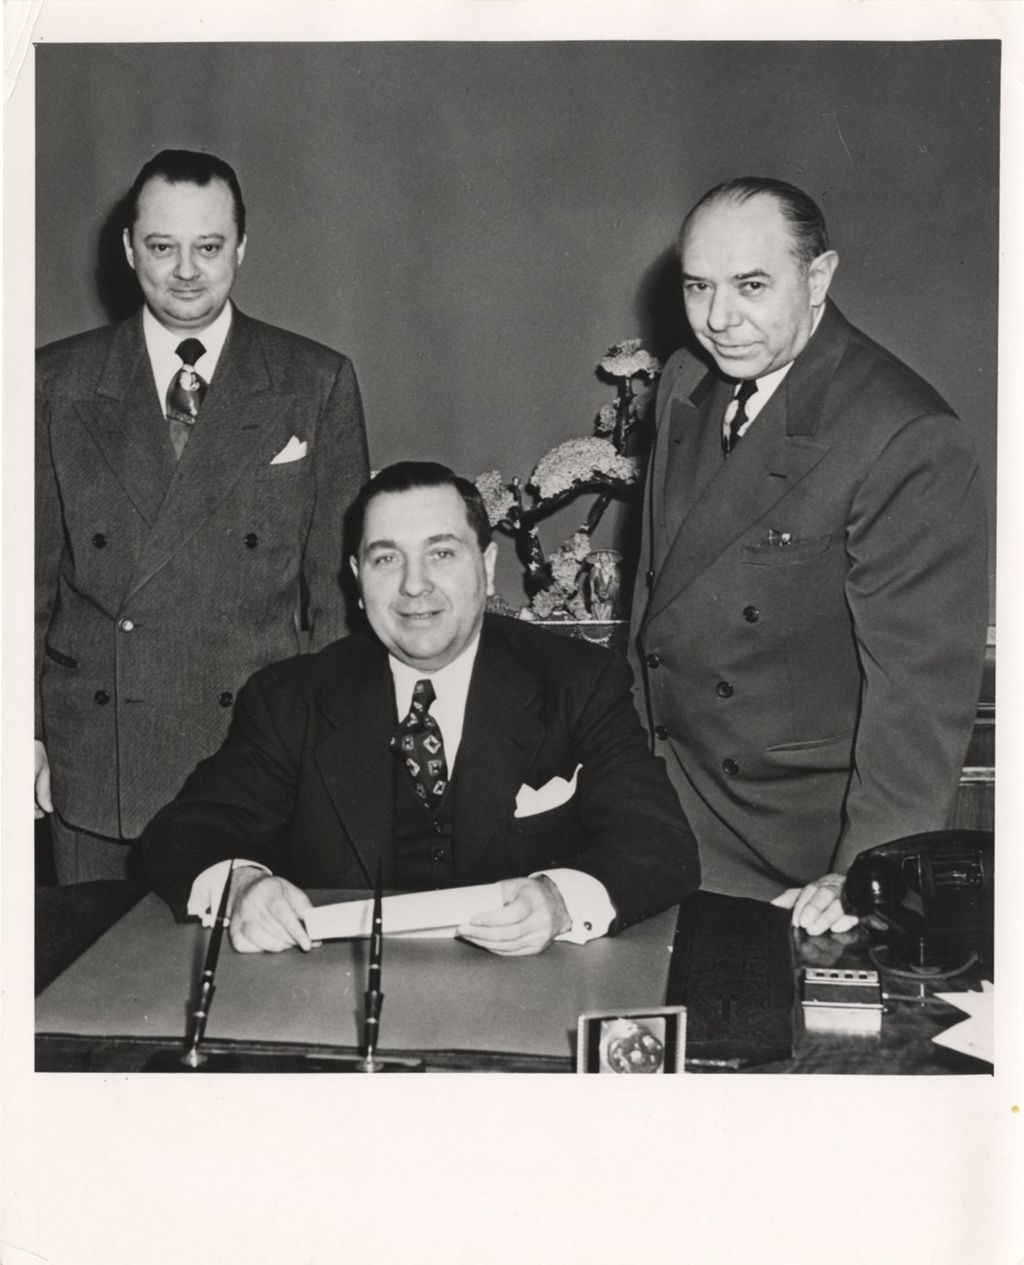 Miniature of Richard J. Daley at his desk with two men